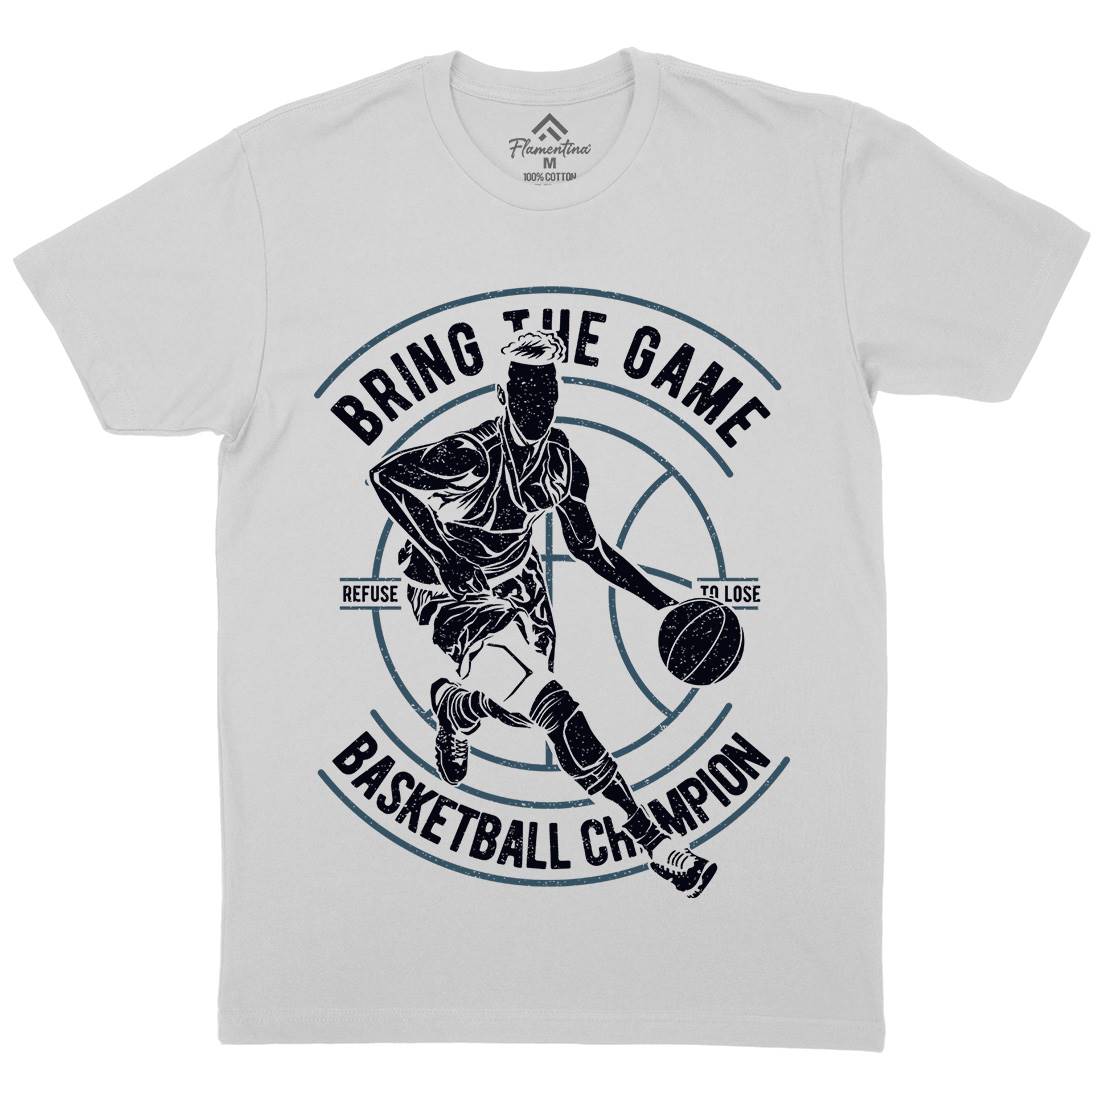 Bring The Game Mens Crew Neck T-Shirt Sport A627